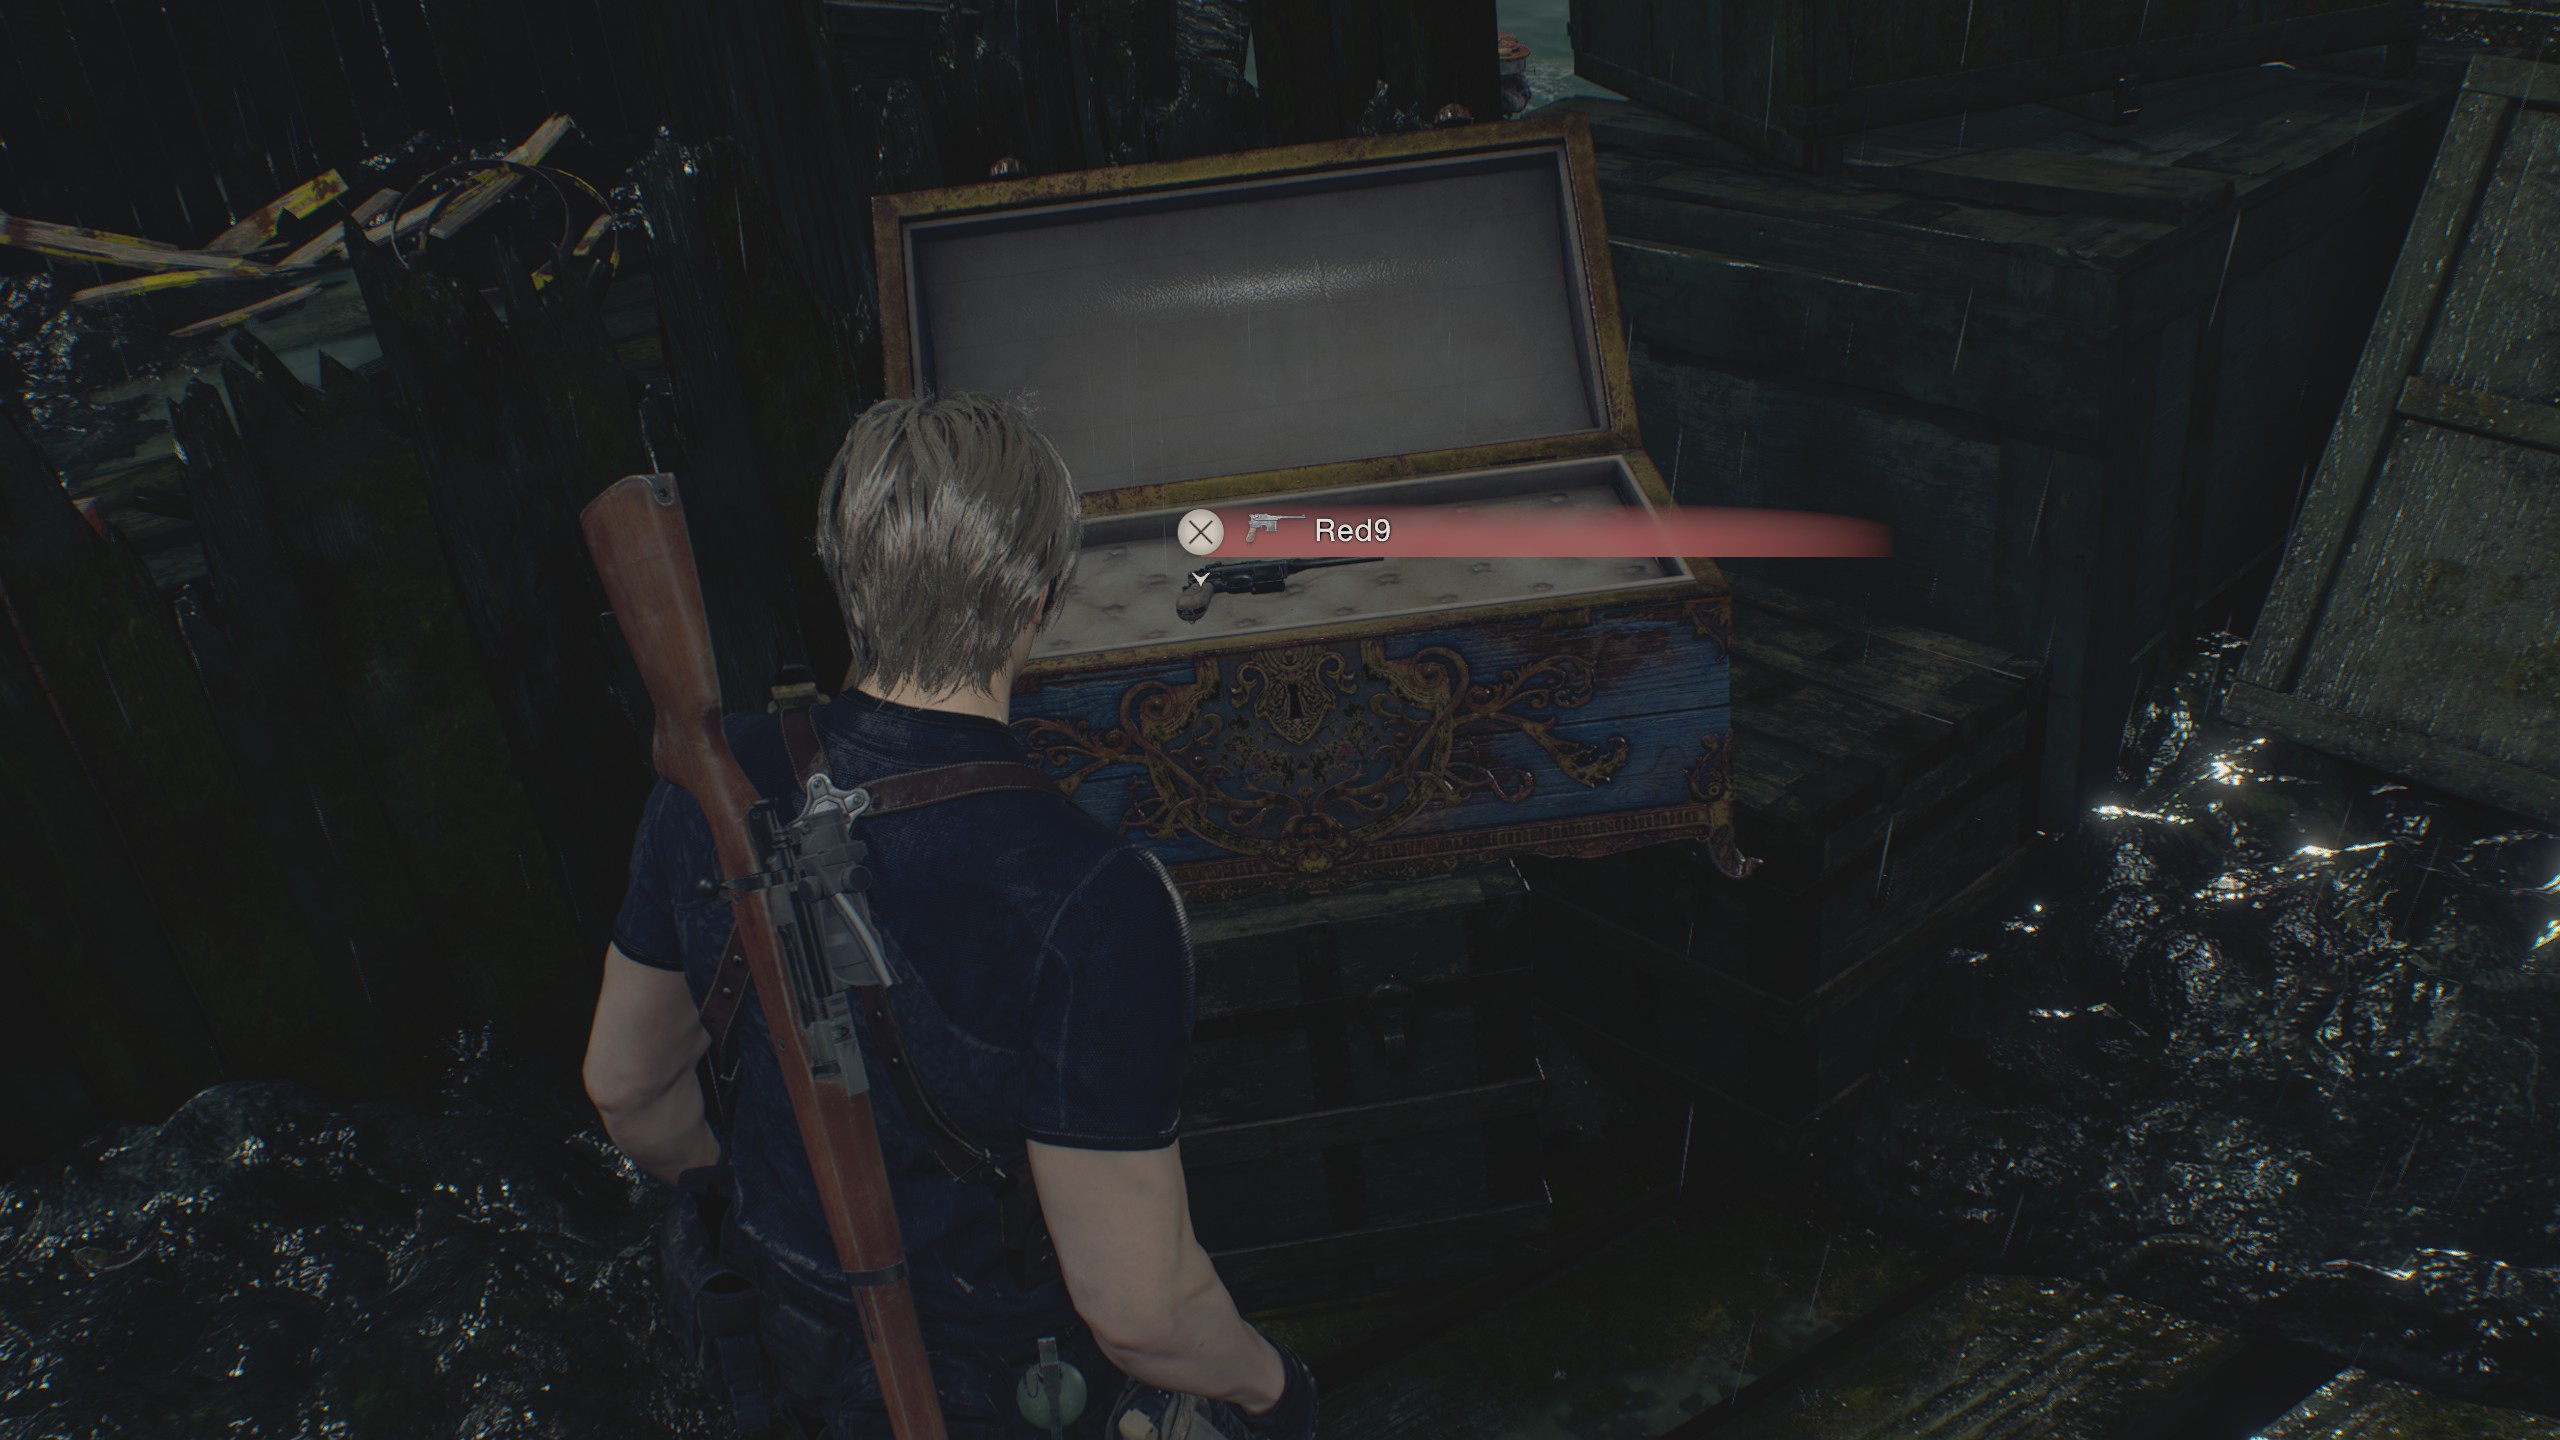 Resident Evil 4 Remake secret weapons - Red9 in a chest